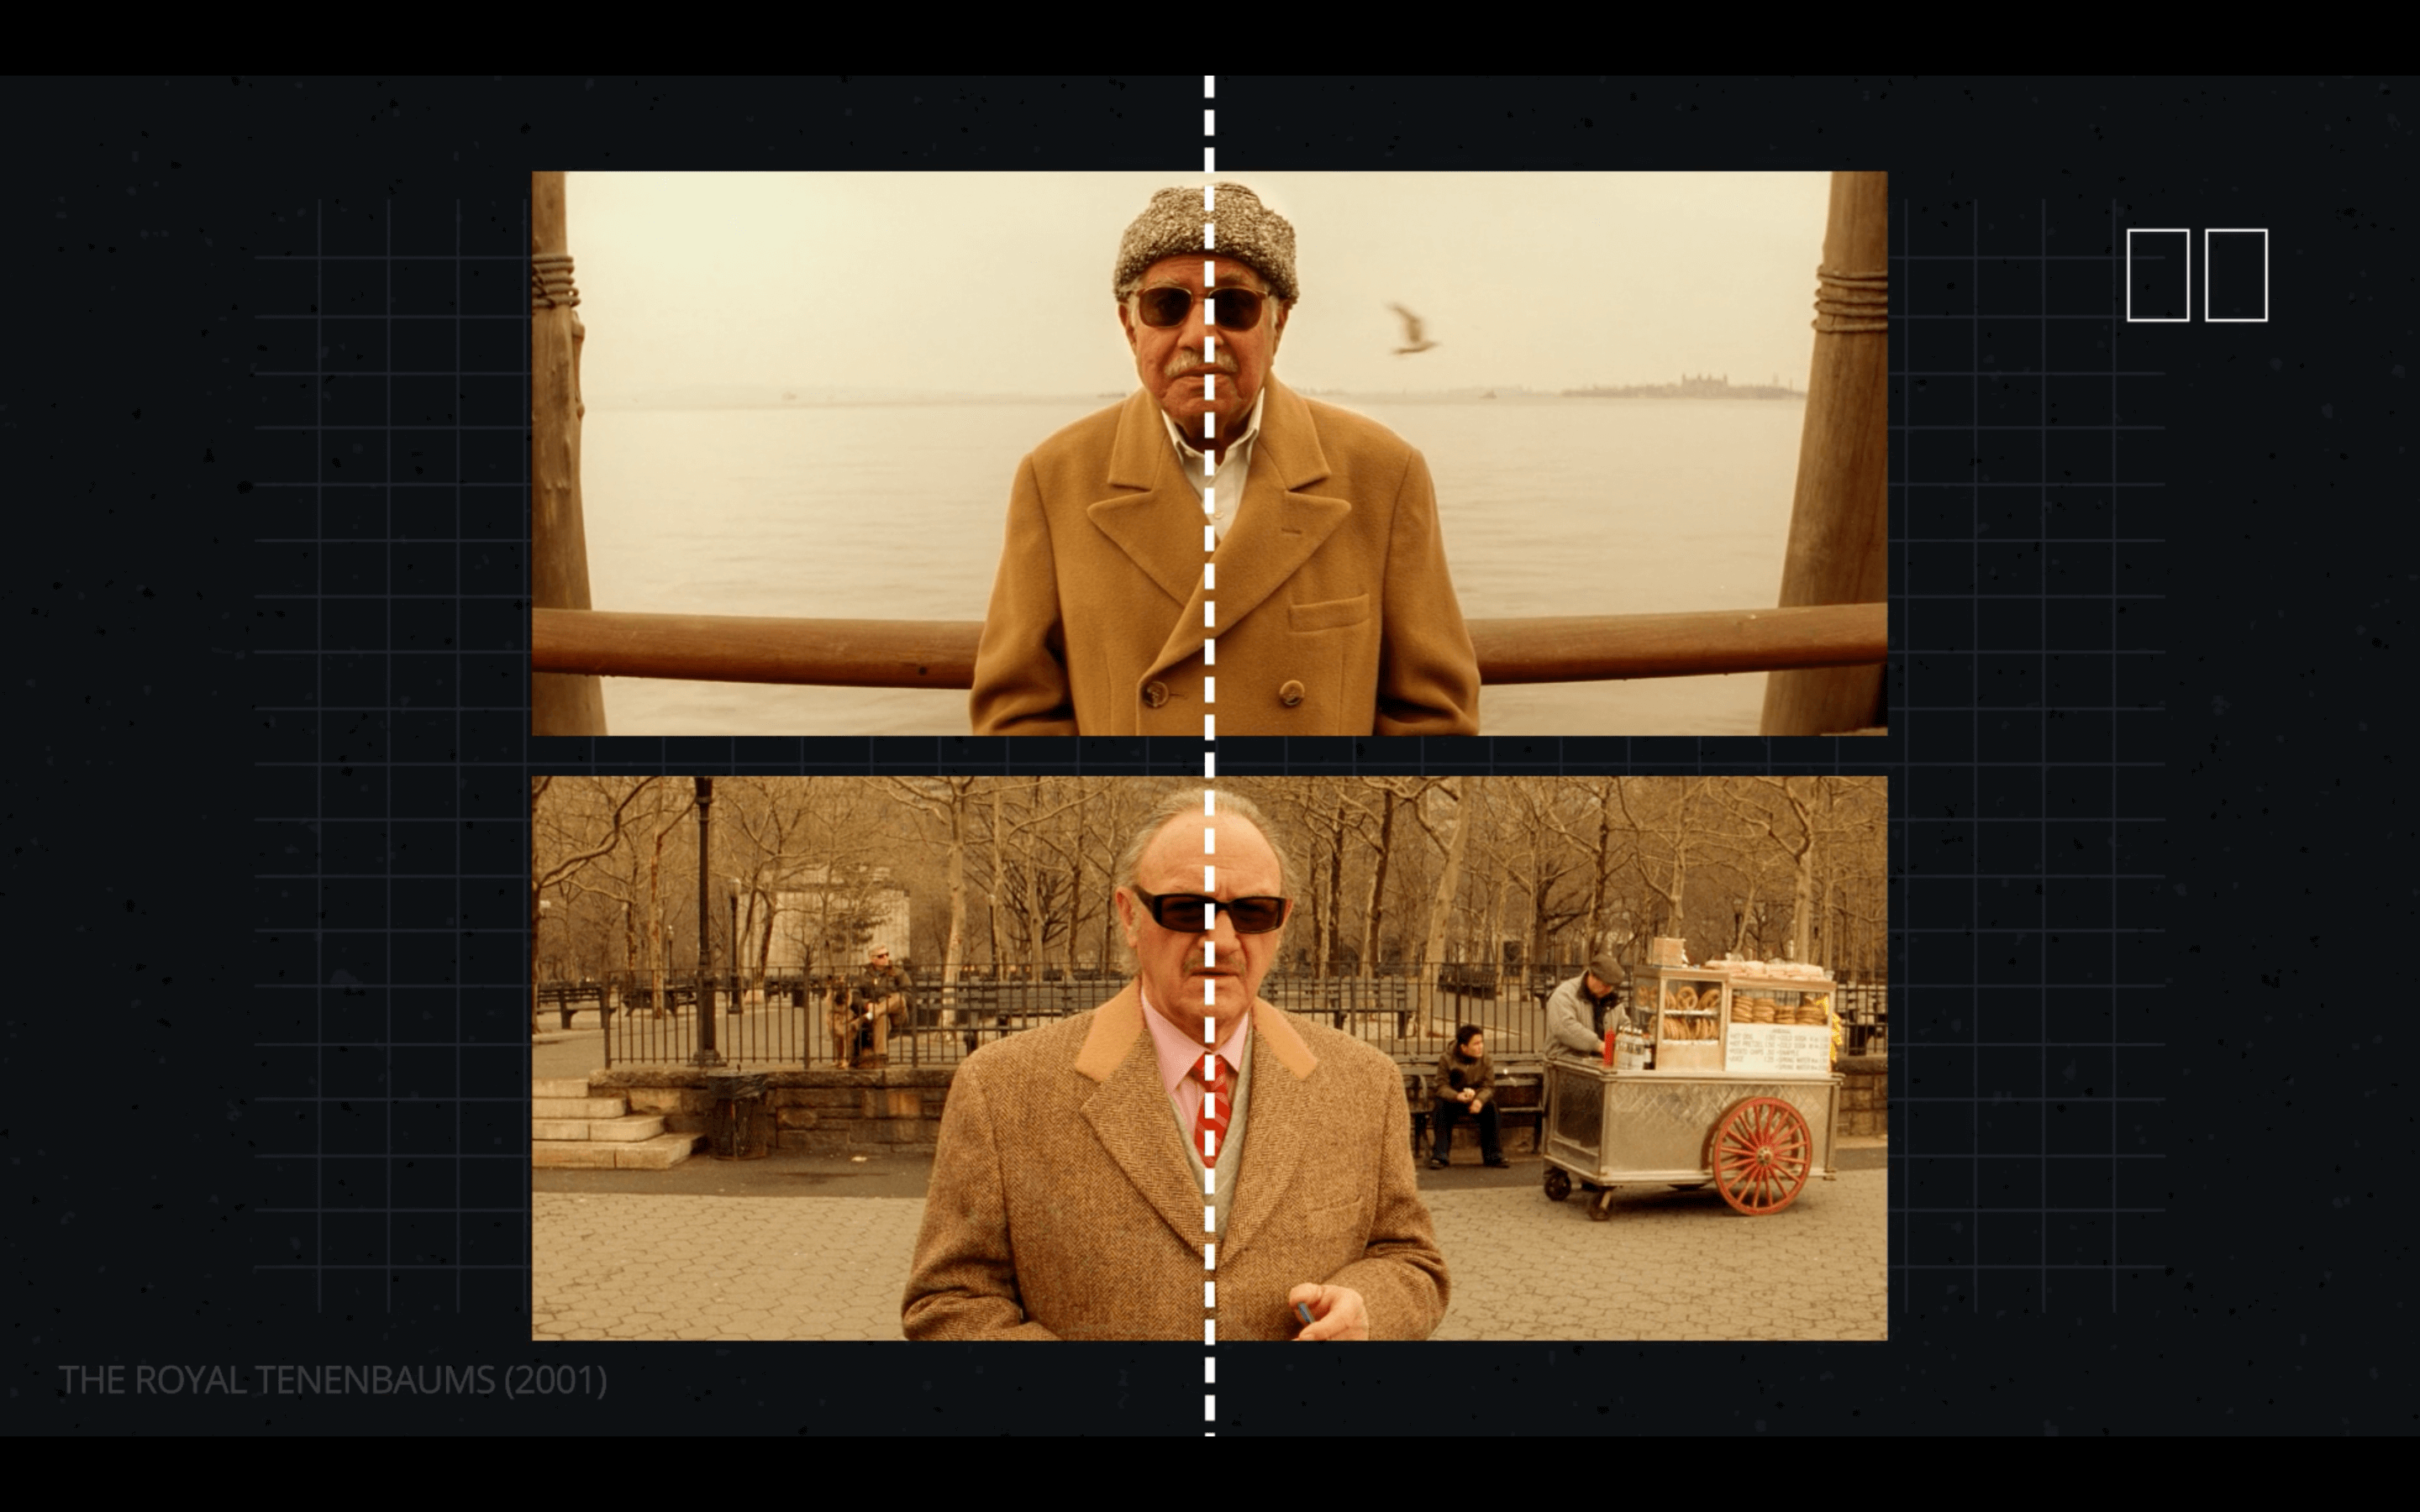 Wes Anderson Symmetrical Style Symmetrical Editing in The Royal Tenenbaums